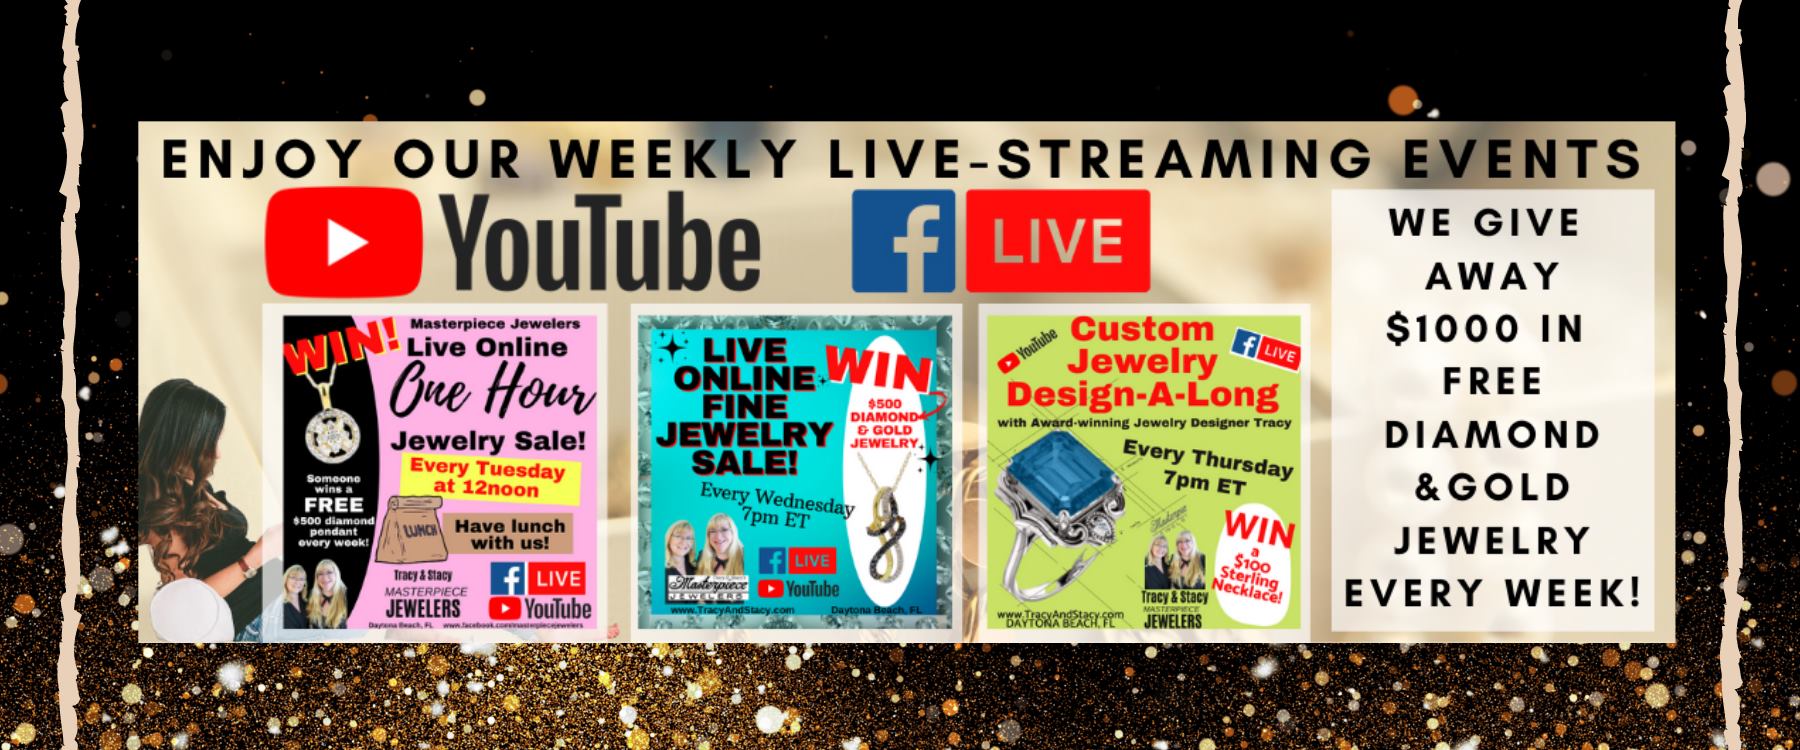 Daytona family-owned jewelry store live events